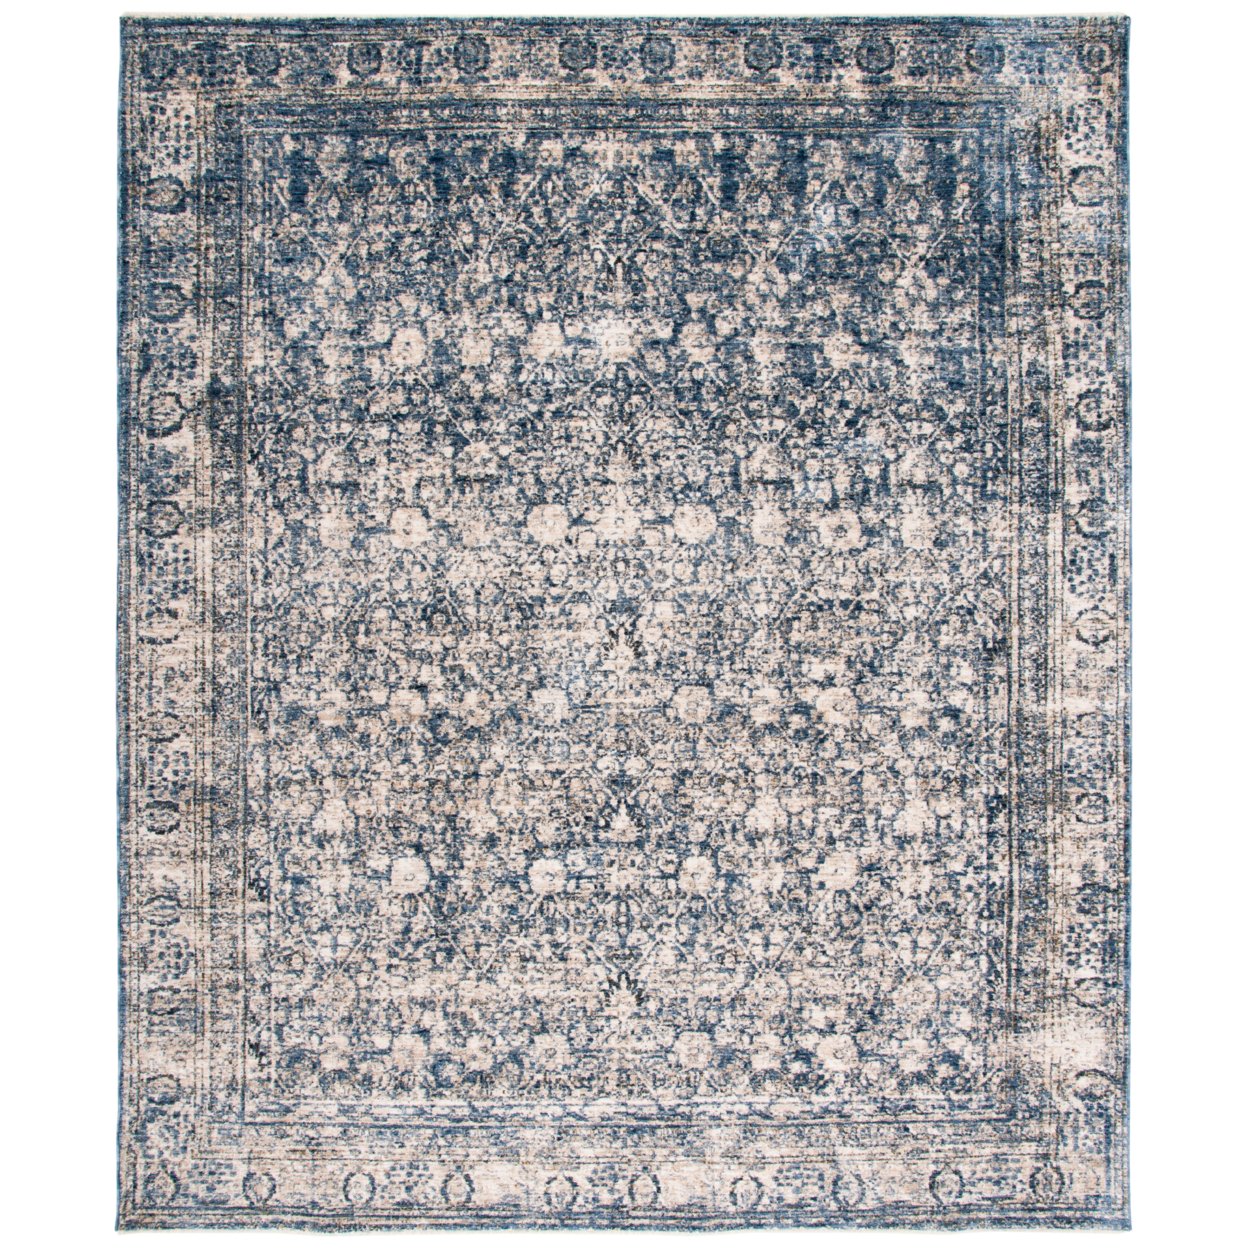 SAFAVIEH Vintage Oushak Collection VOS233M Navy/Ivory Rug - image 5 of 5